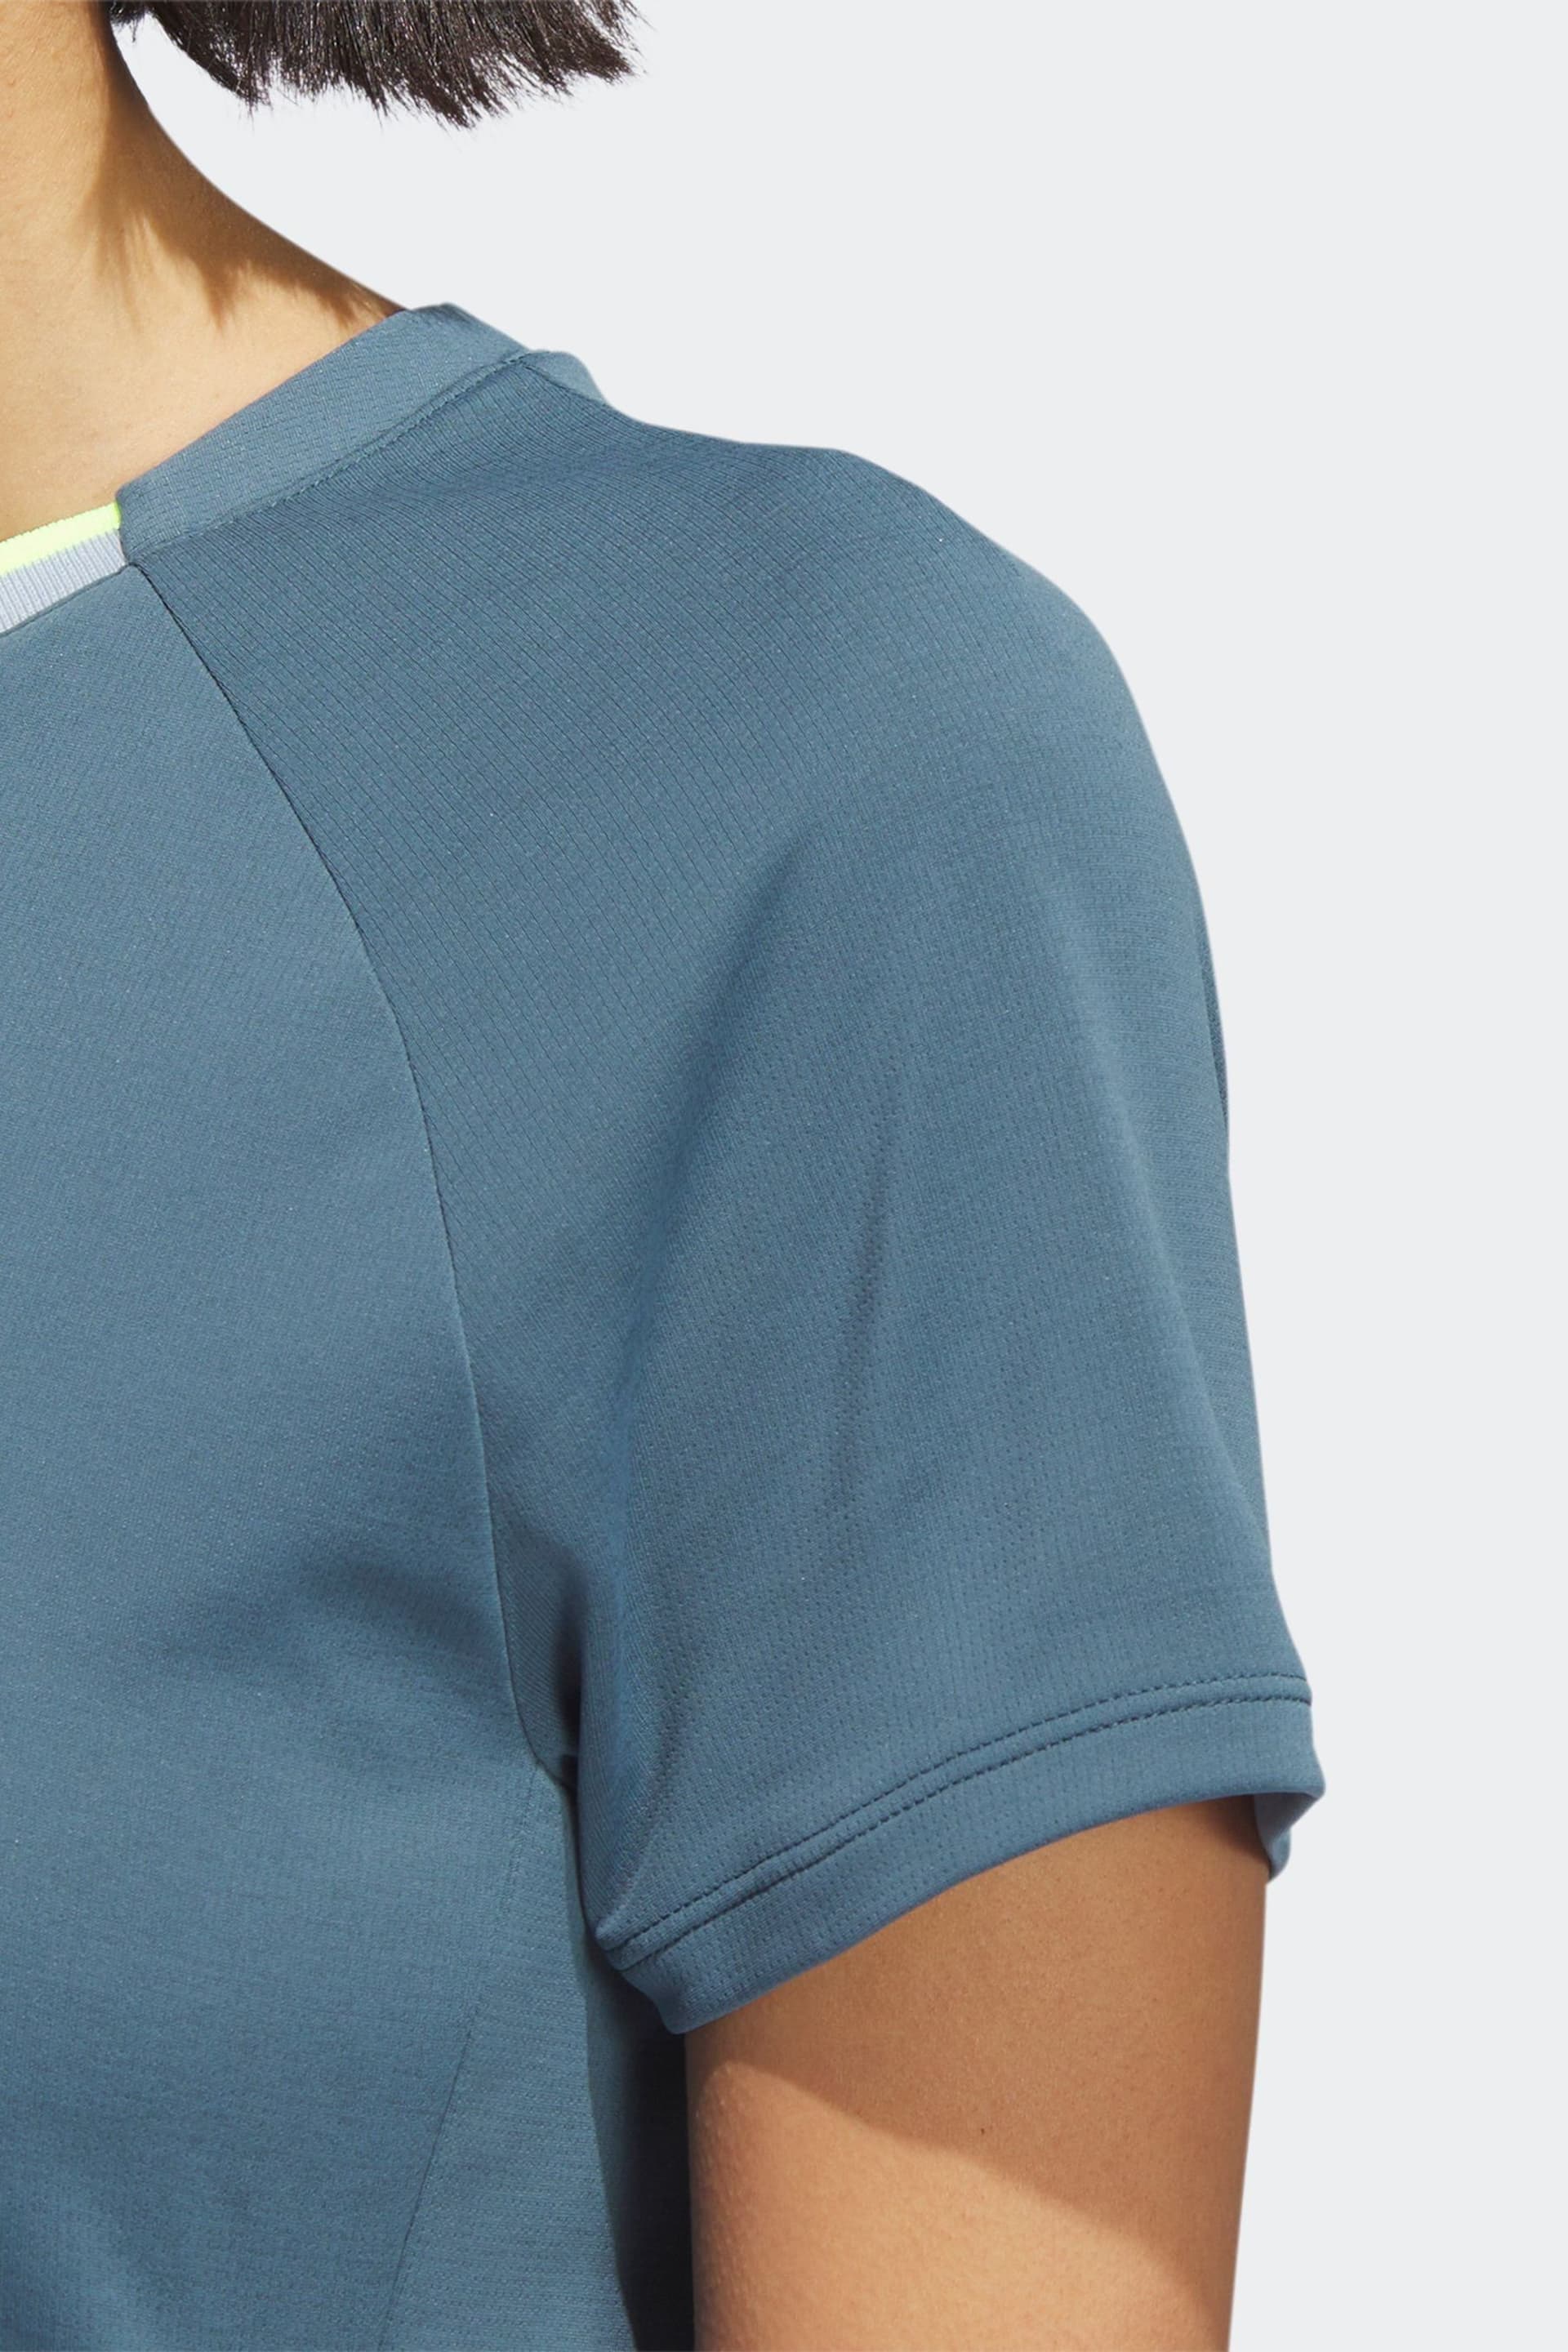 adidas Teal Blue Ultimate365 Tour Heat.rdy V-neck Top - Image 5 of 8